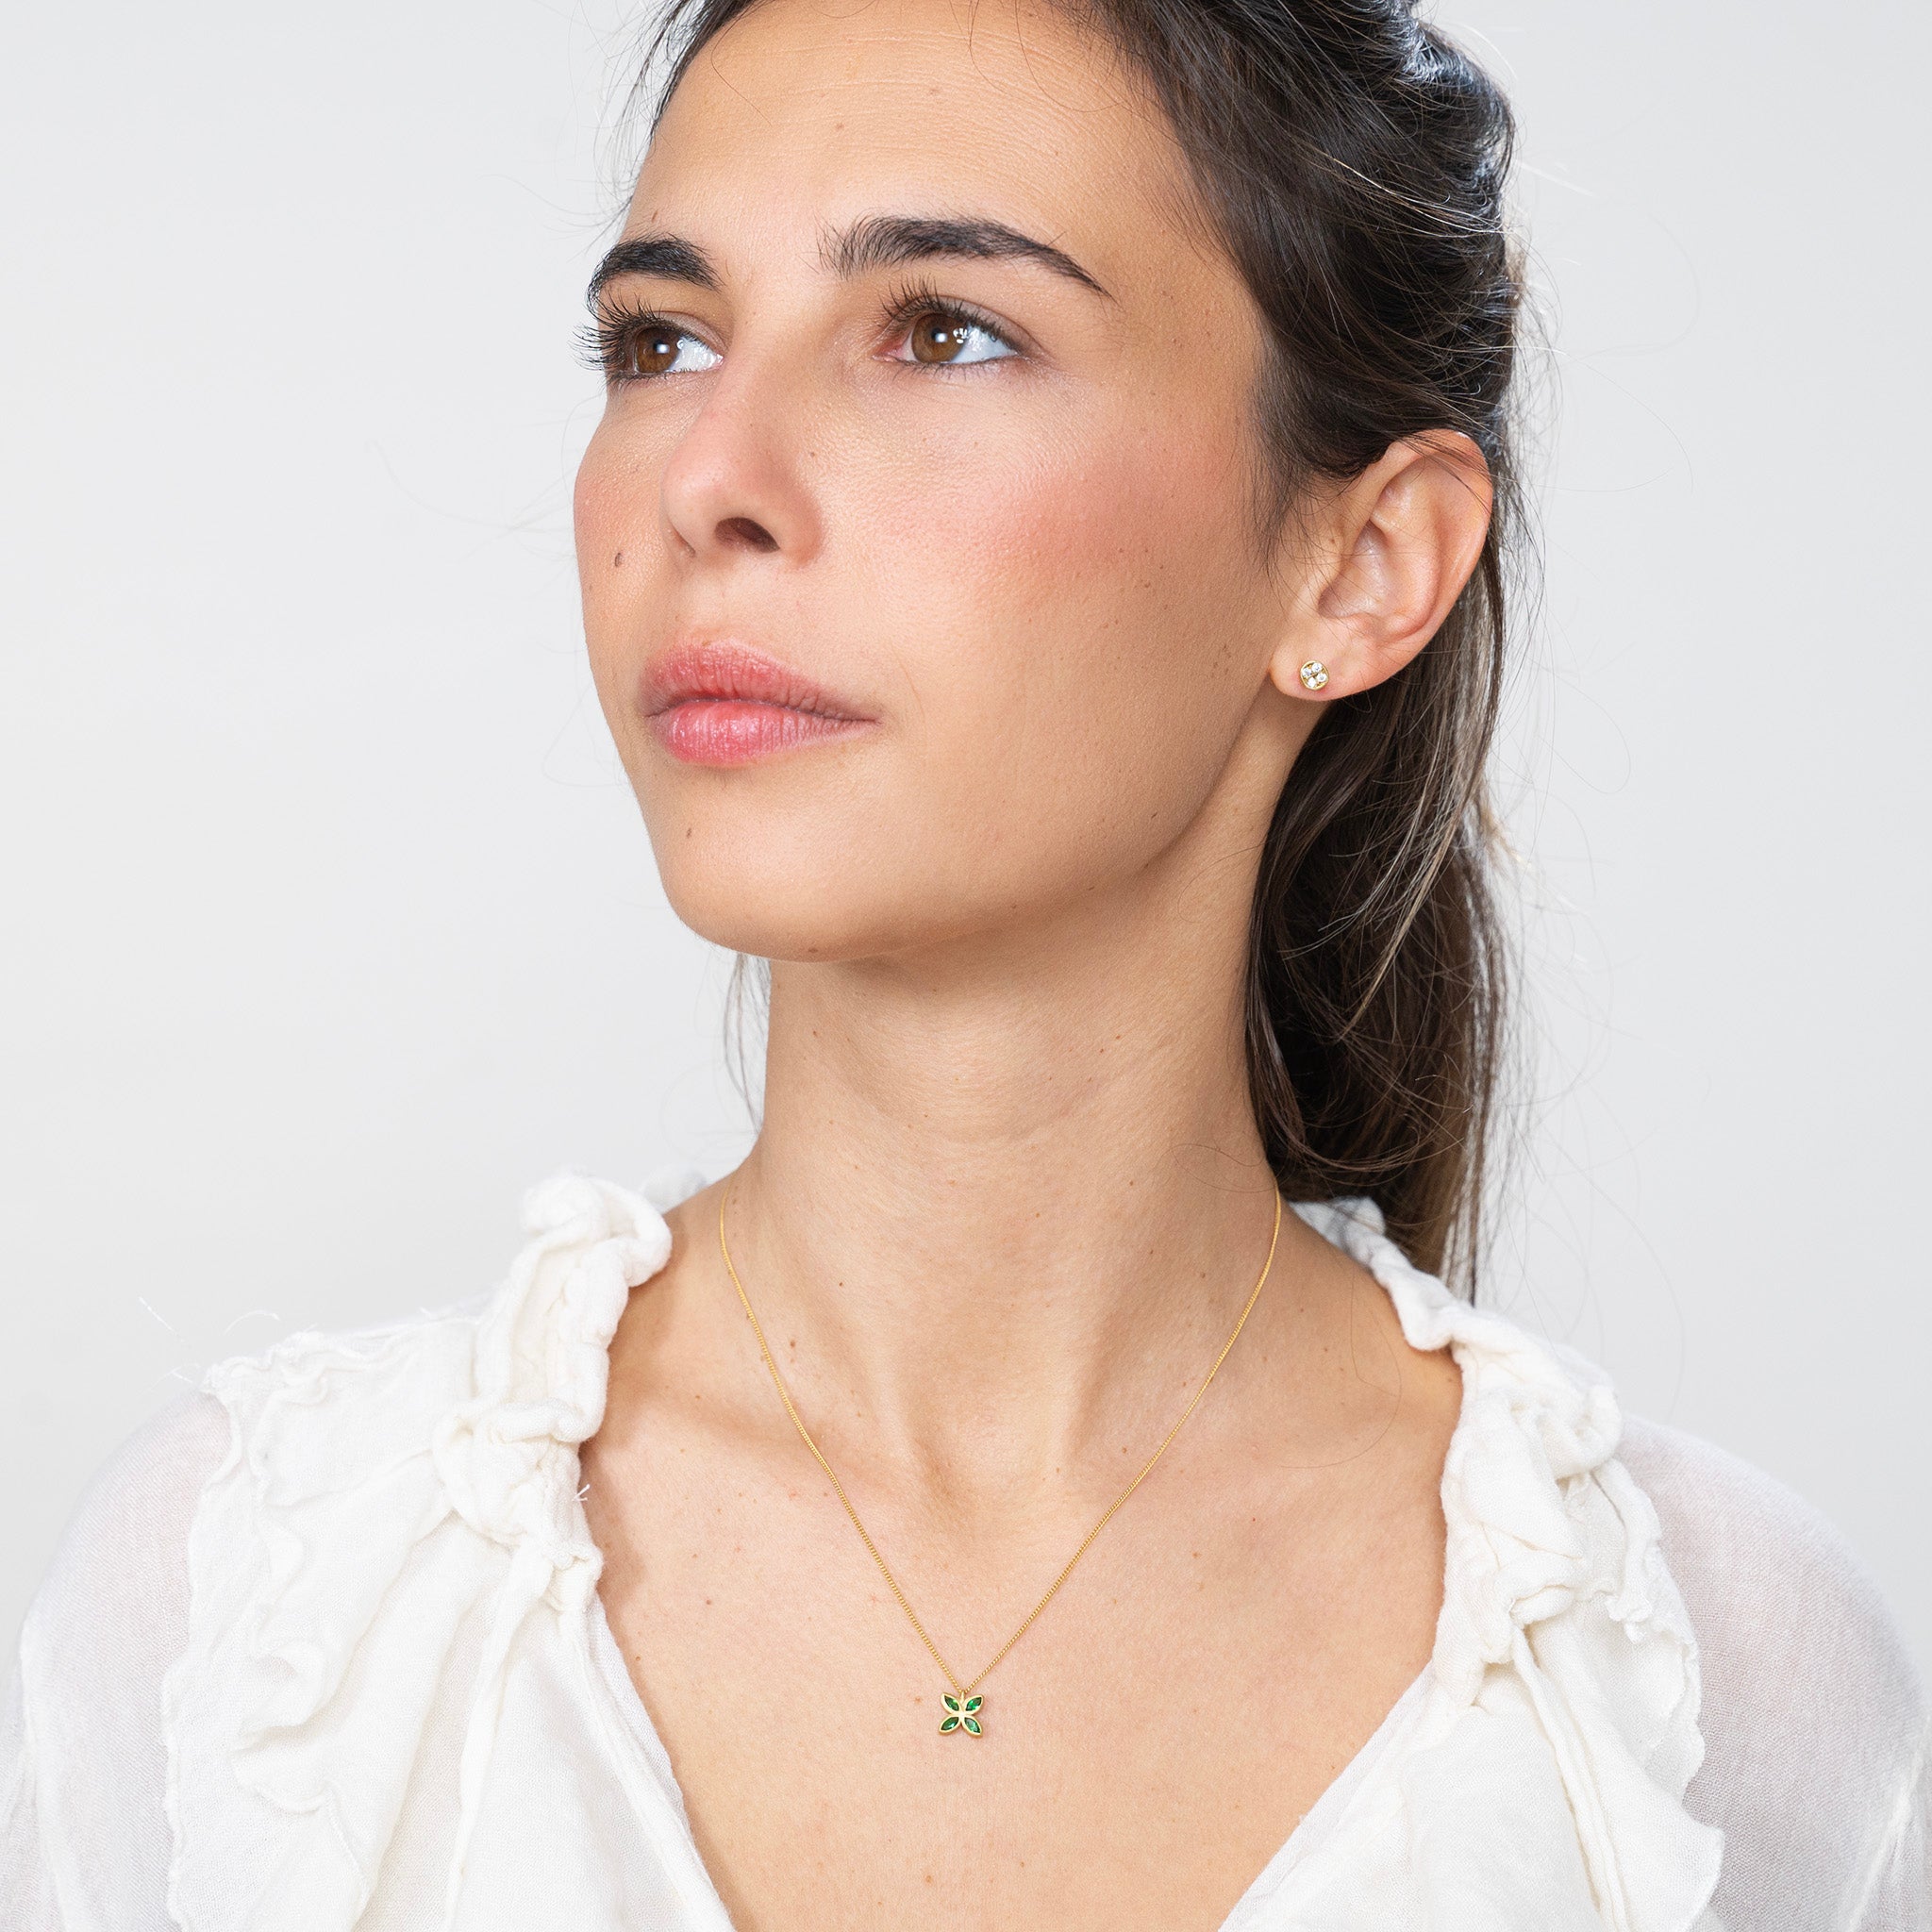 Model beautifully wearing the Gold Spring Flowers pendant, with marquise-cut emeralds forming an intricate flower, enhancing any outfit with a luxurious touch of spring.